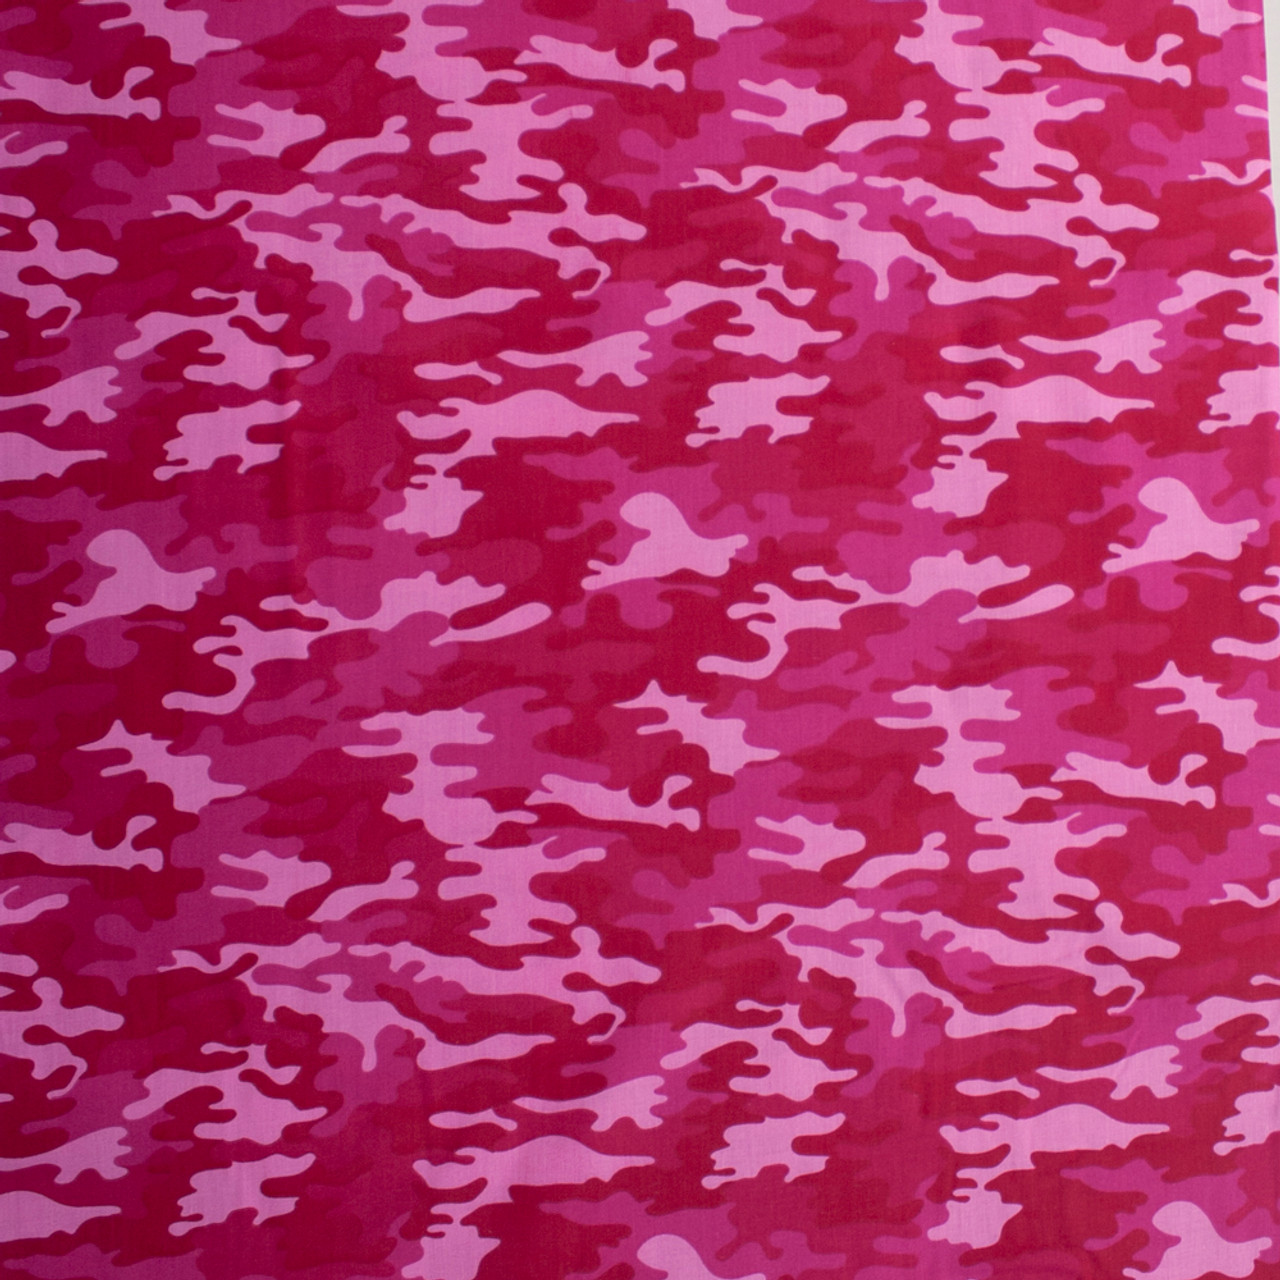  Cotton Camo Hot Pink, Fabric by the Yard : Arts, Crafts & Sewing